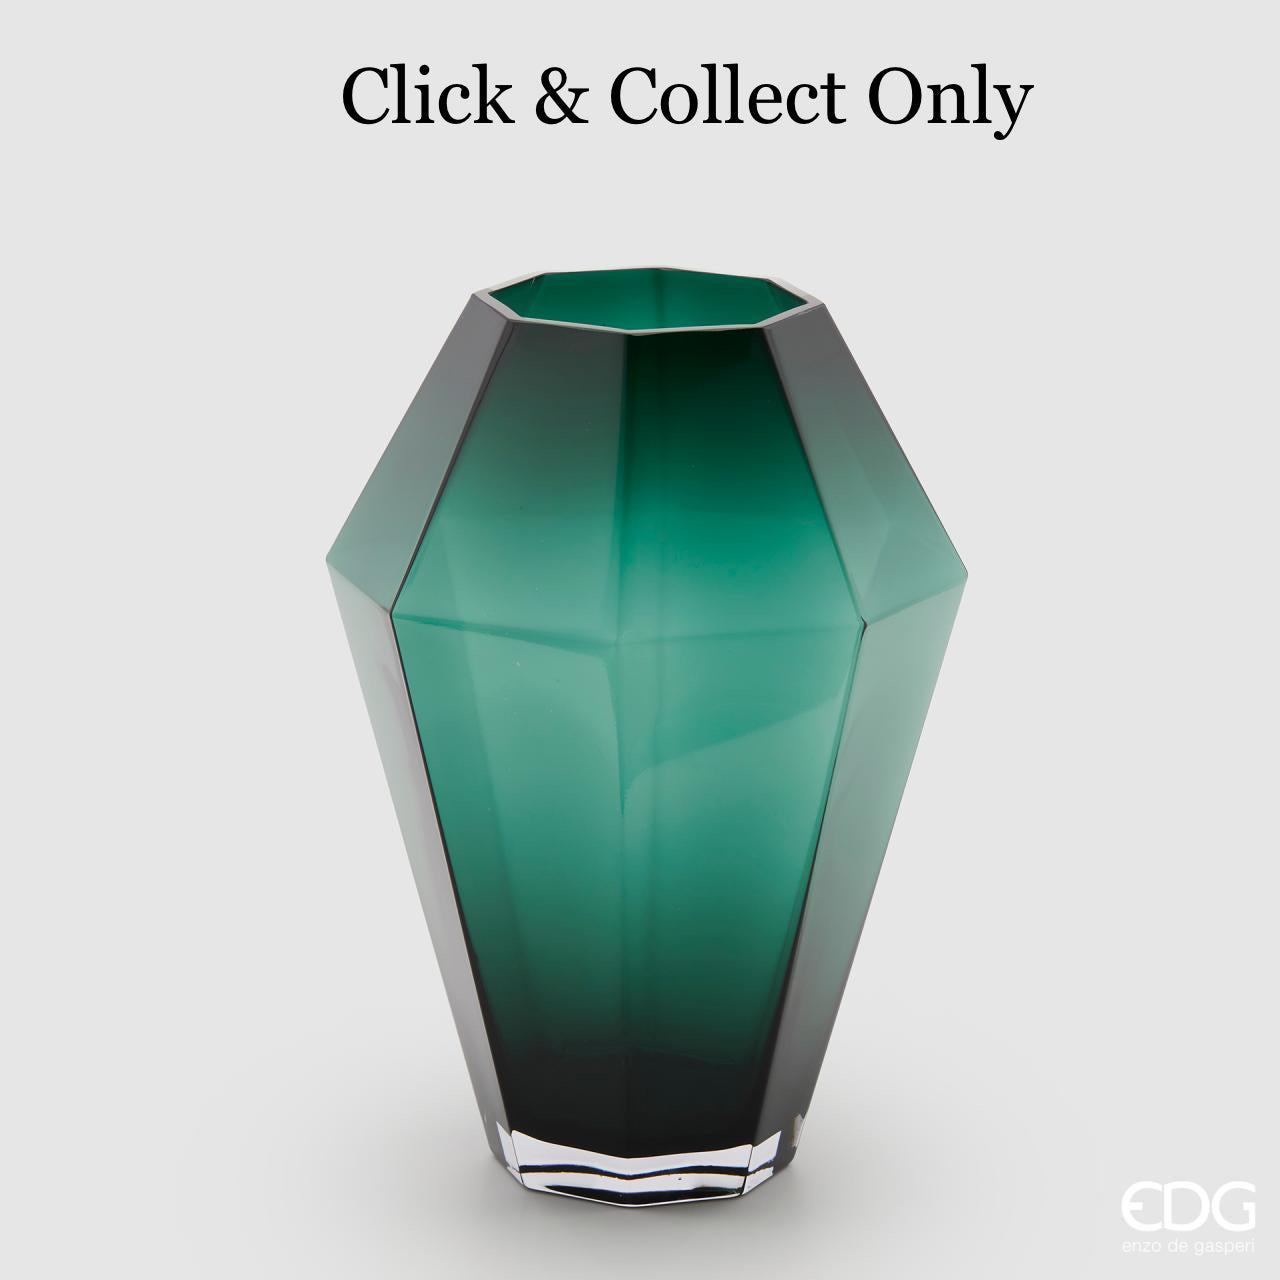 Green Diamond Glass Vase - 40cm **CLICK & COLLECT ONLY**